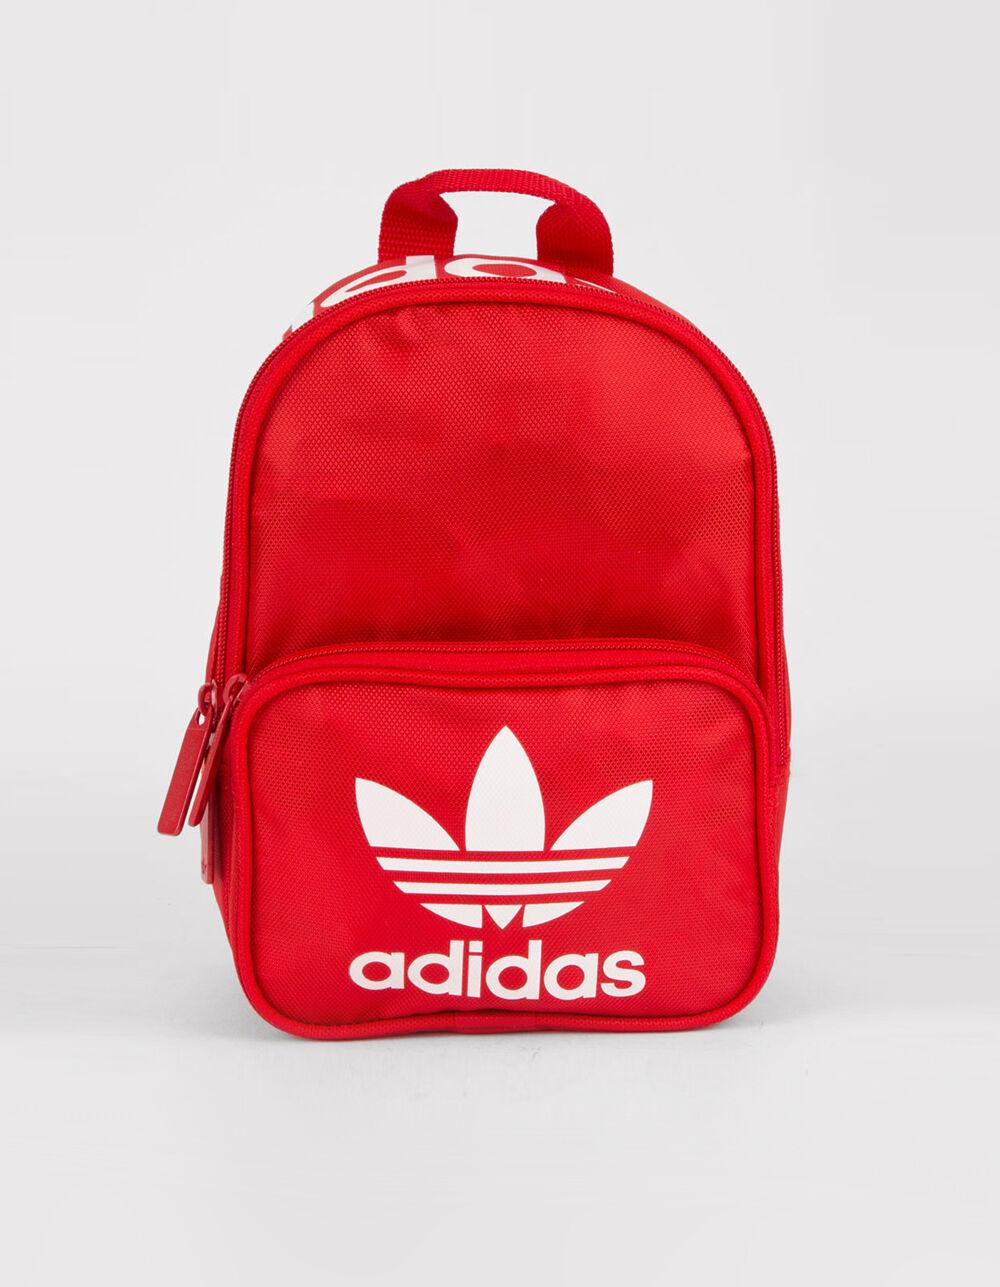 adidas Synthetic Originals Santiago Red Mini Backpack - Save 3% - Lyst